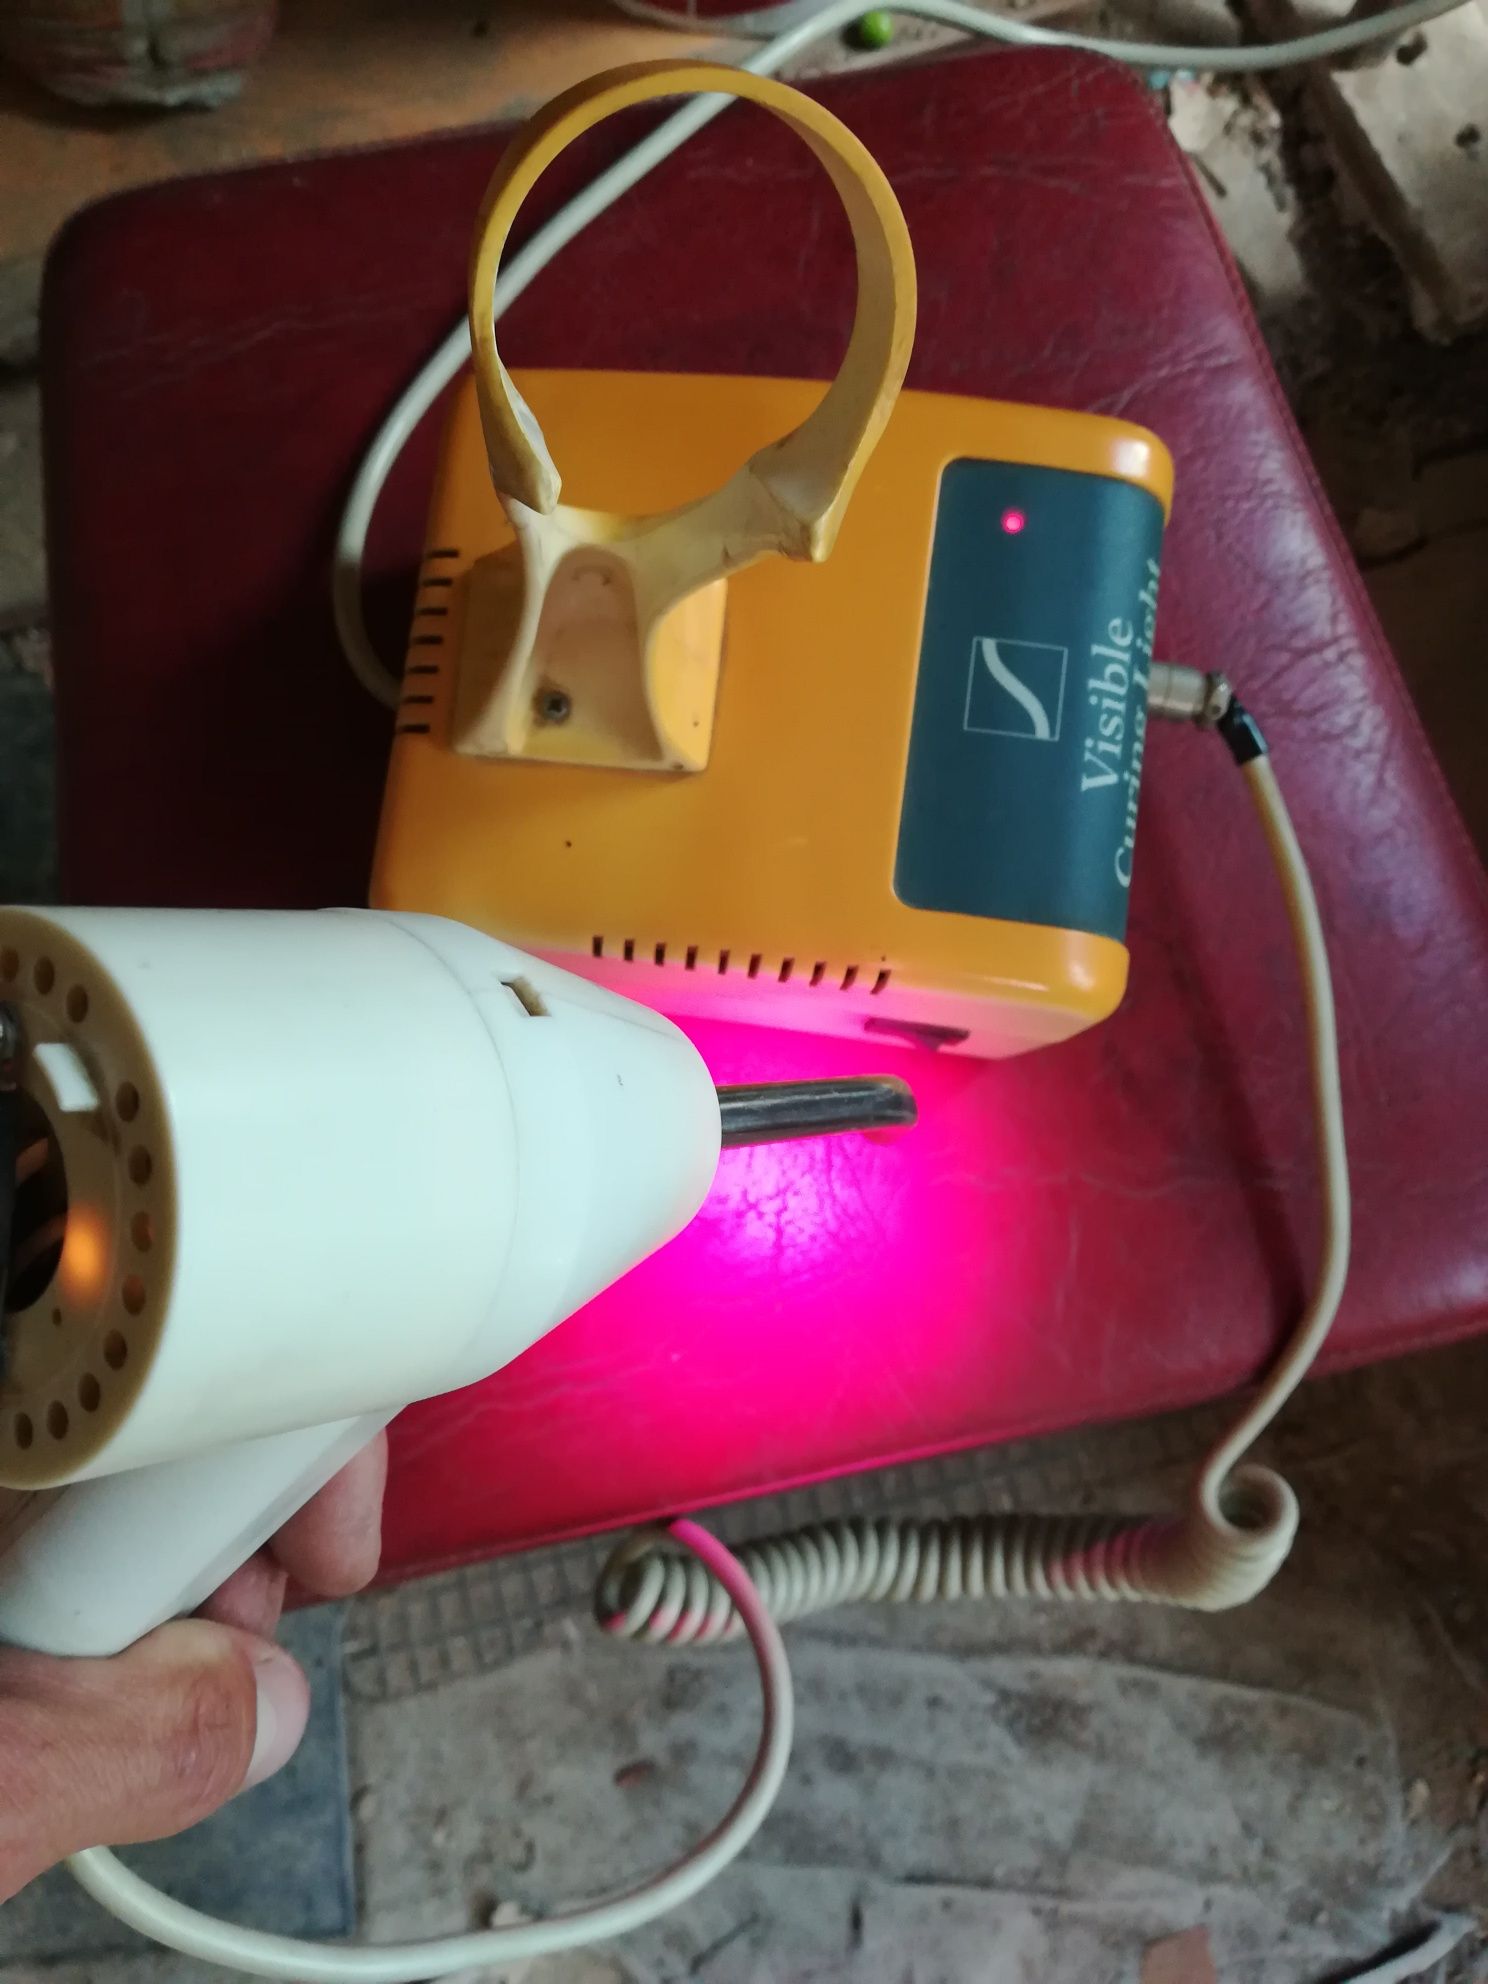 Visible curing light CU-75